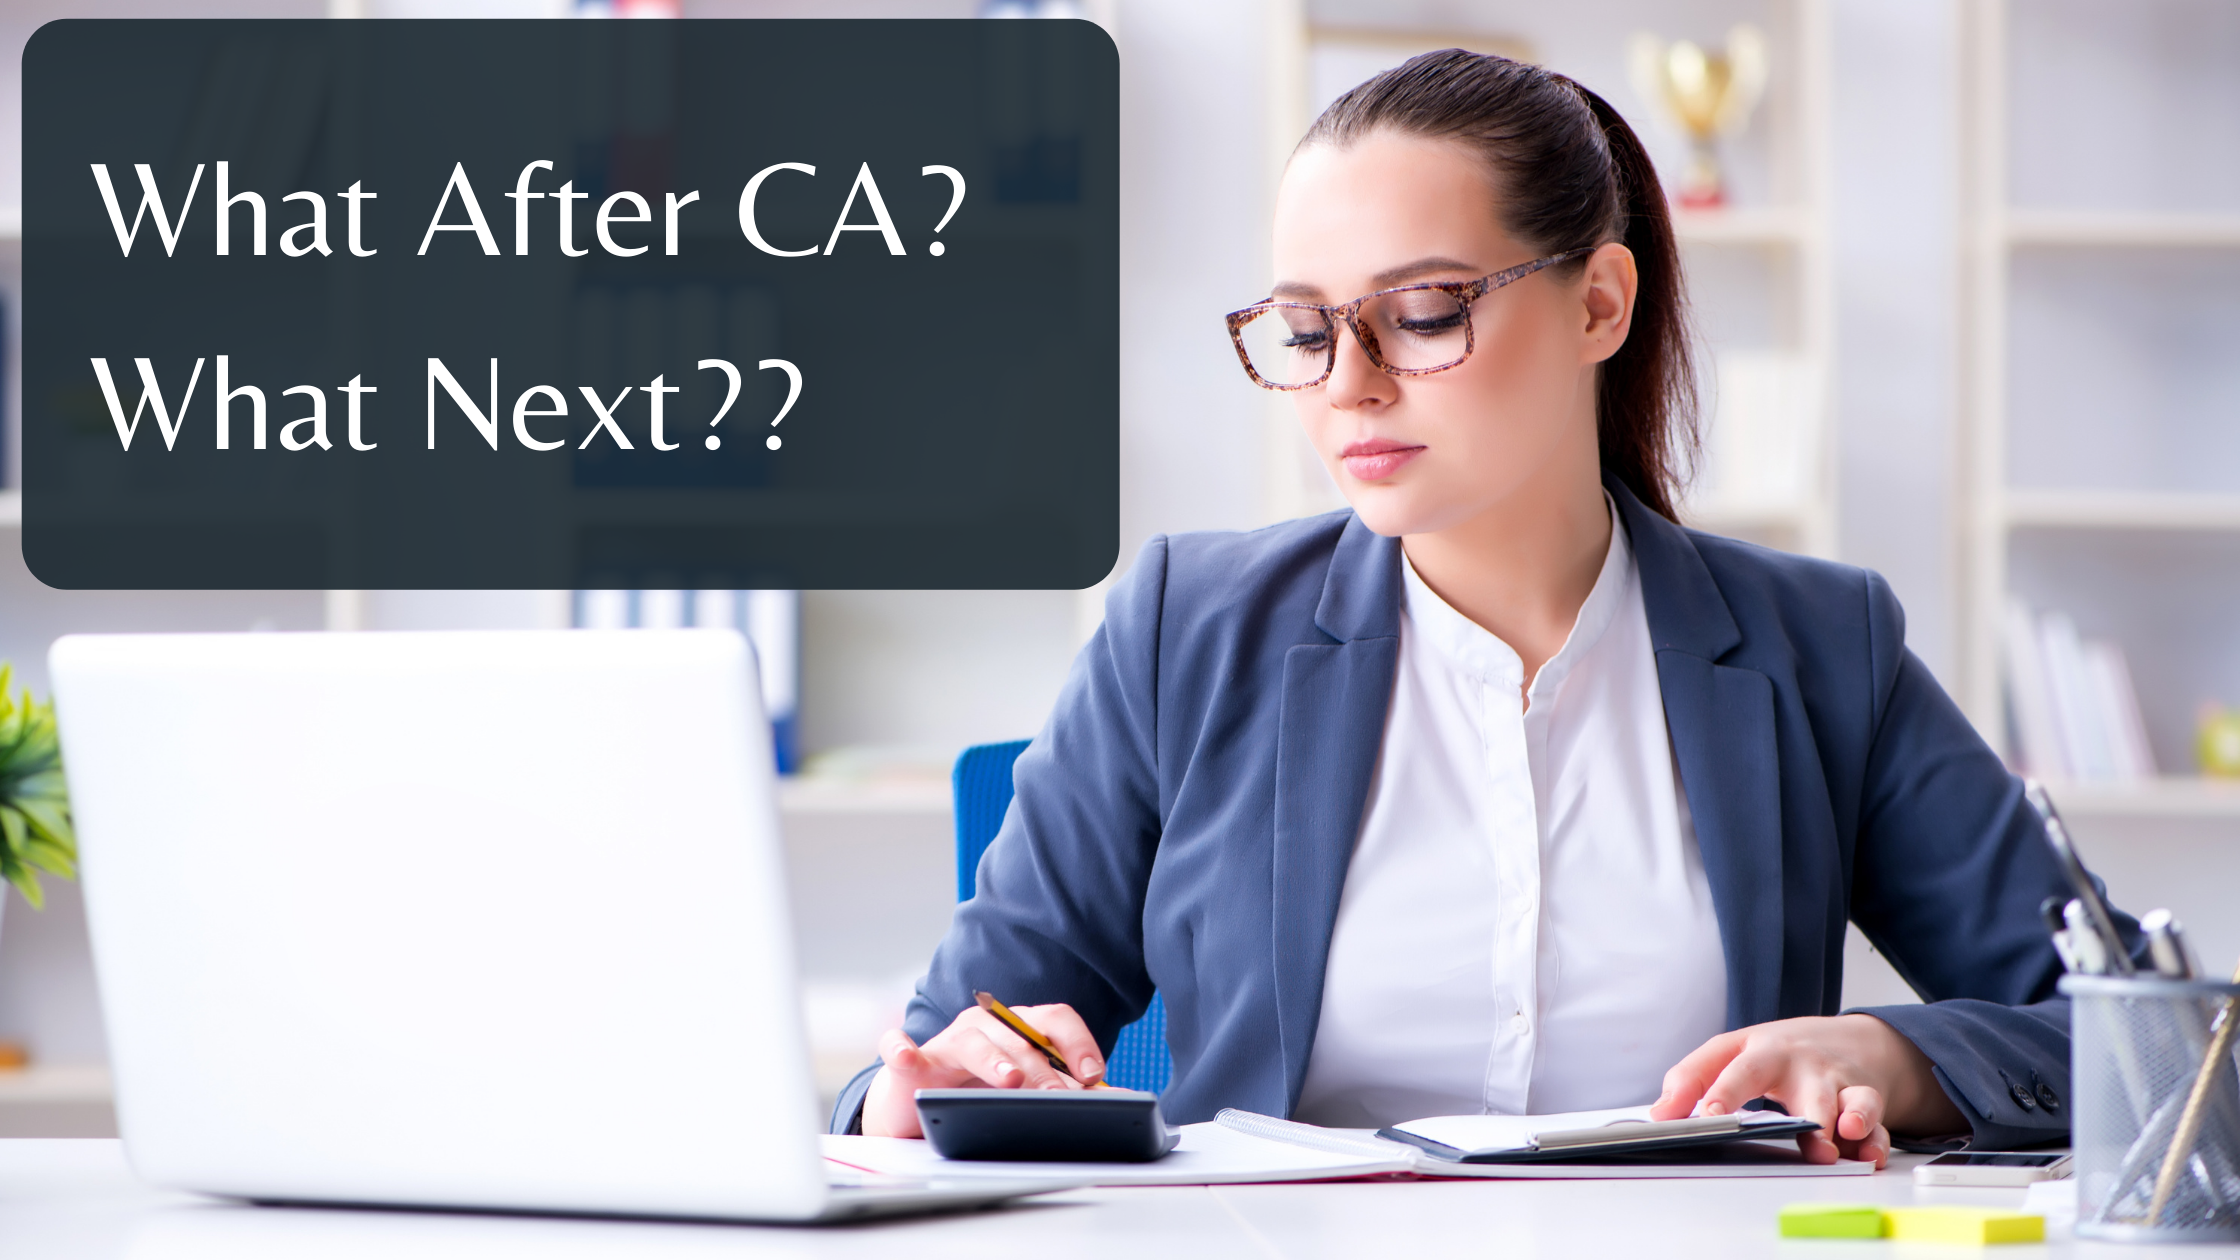 What Next? Career Options After CA in India and Abroad